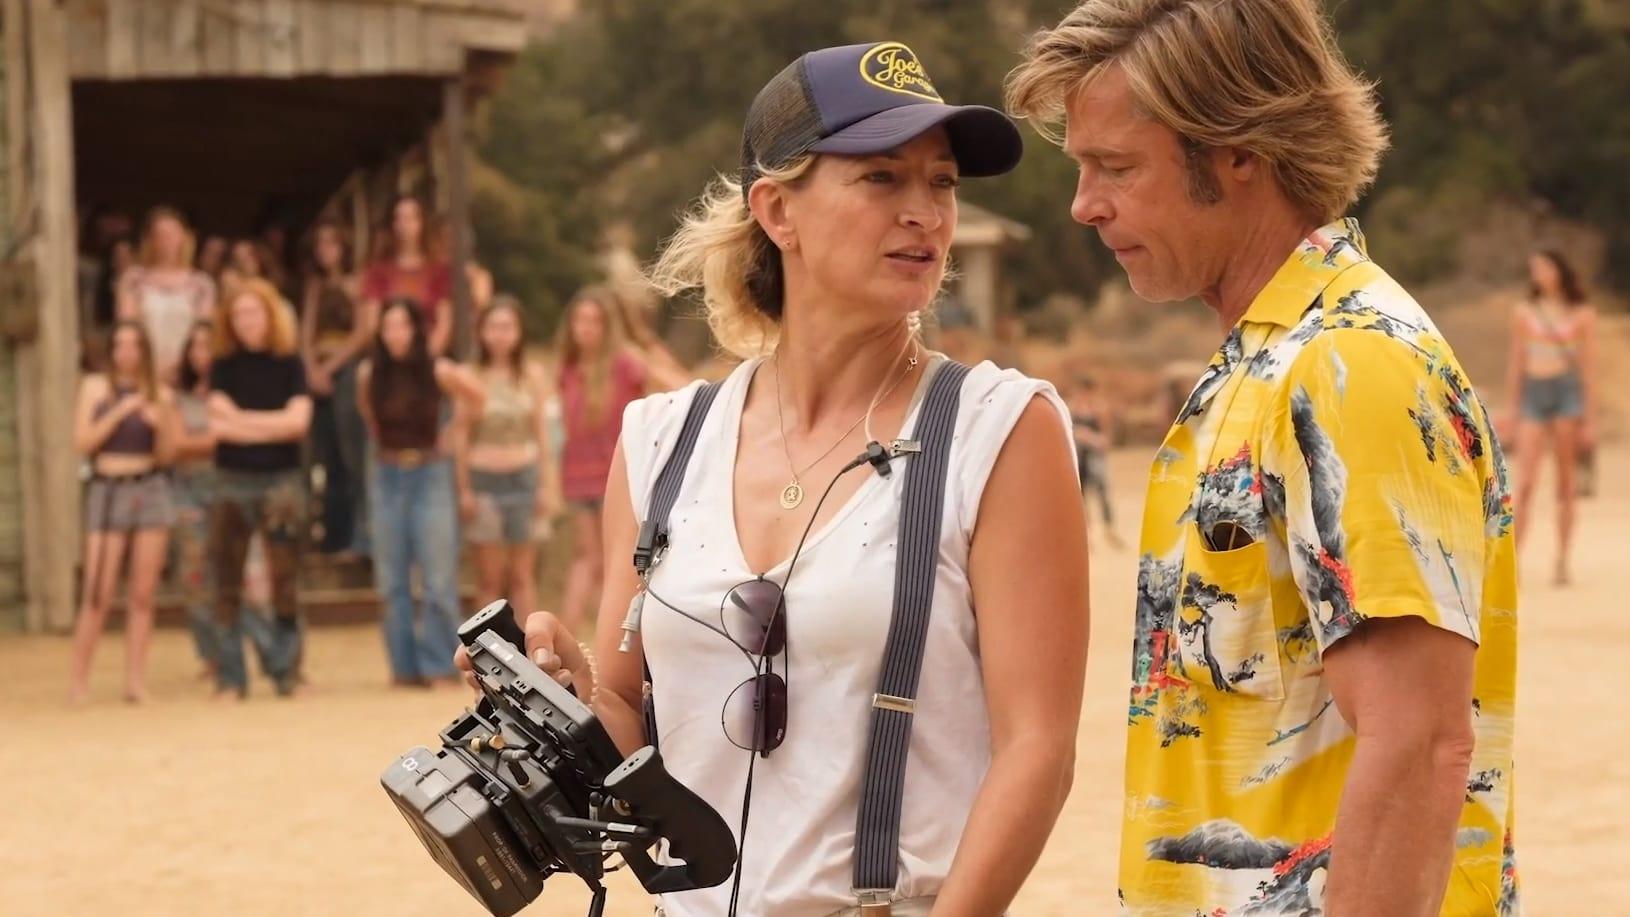 Zoë Bell: The Woman Behind the Action of Tarantino's 'Once Upon a Time in Hollywood' backdrop